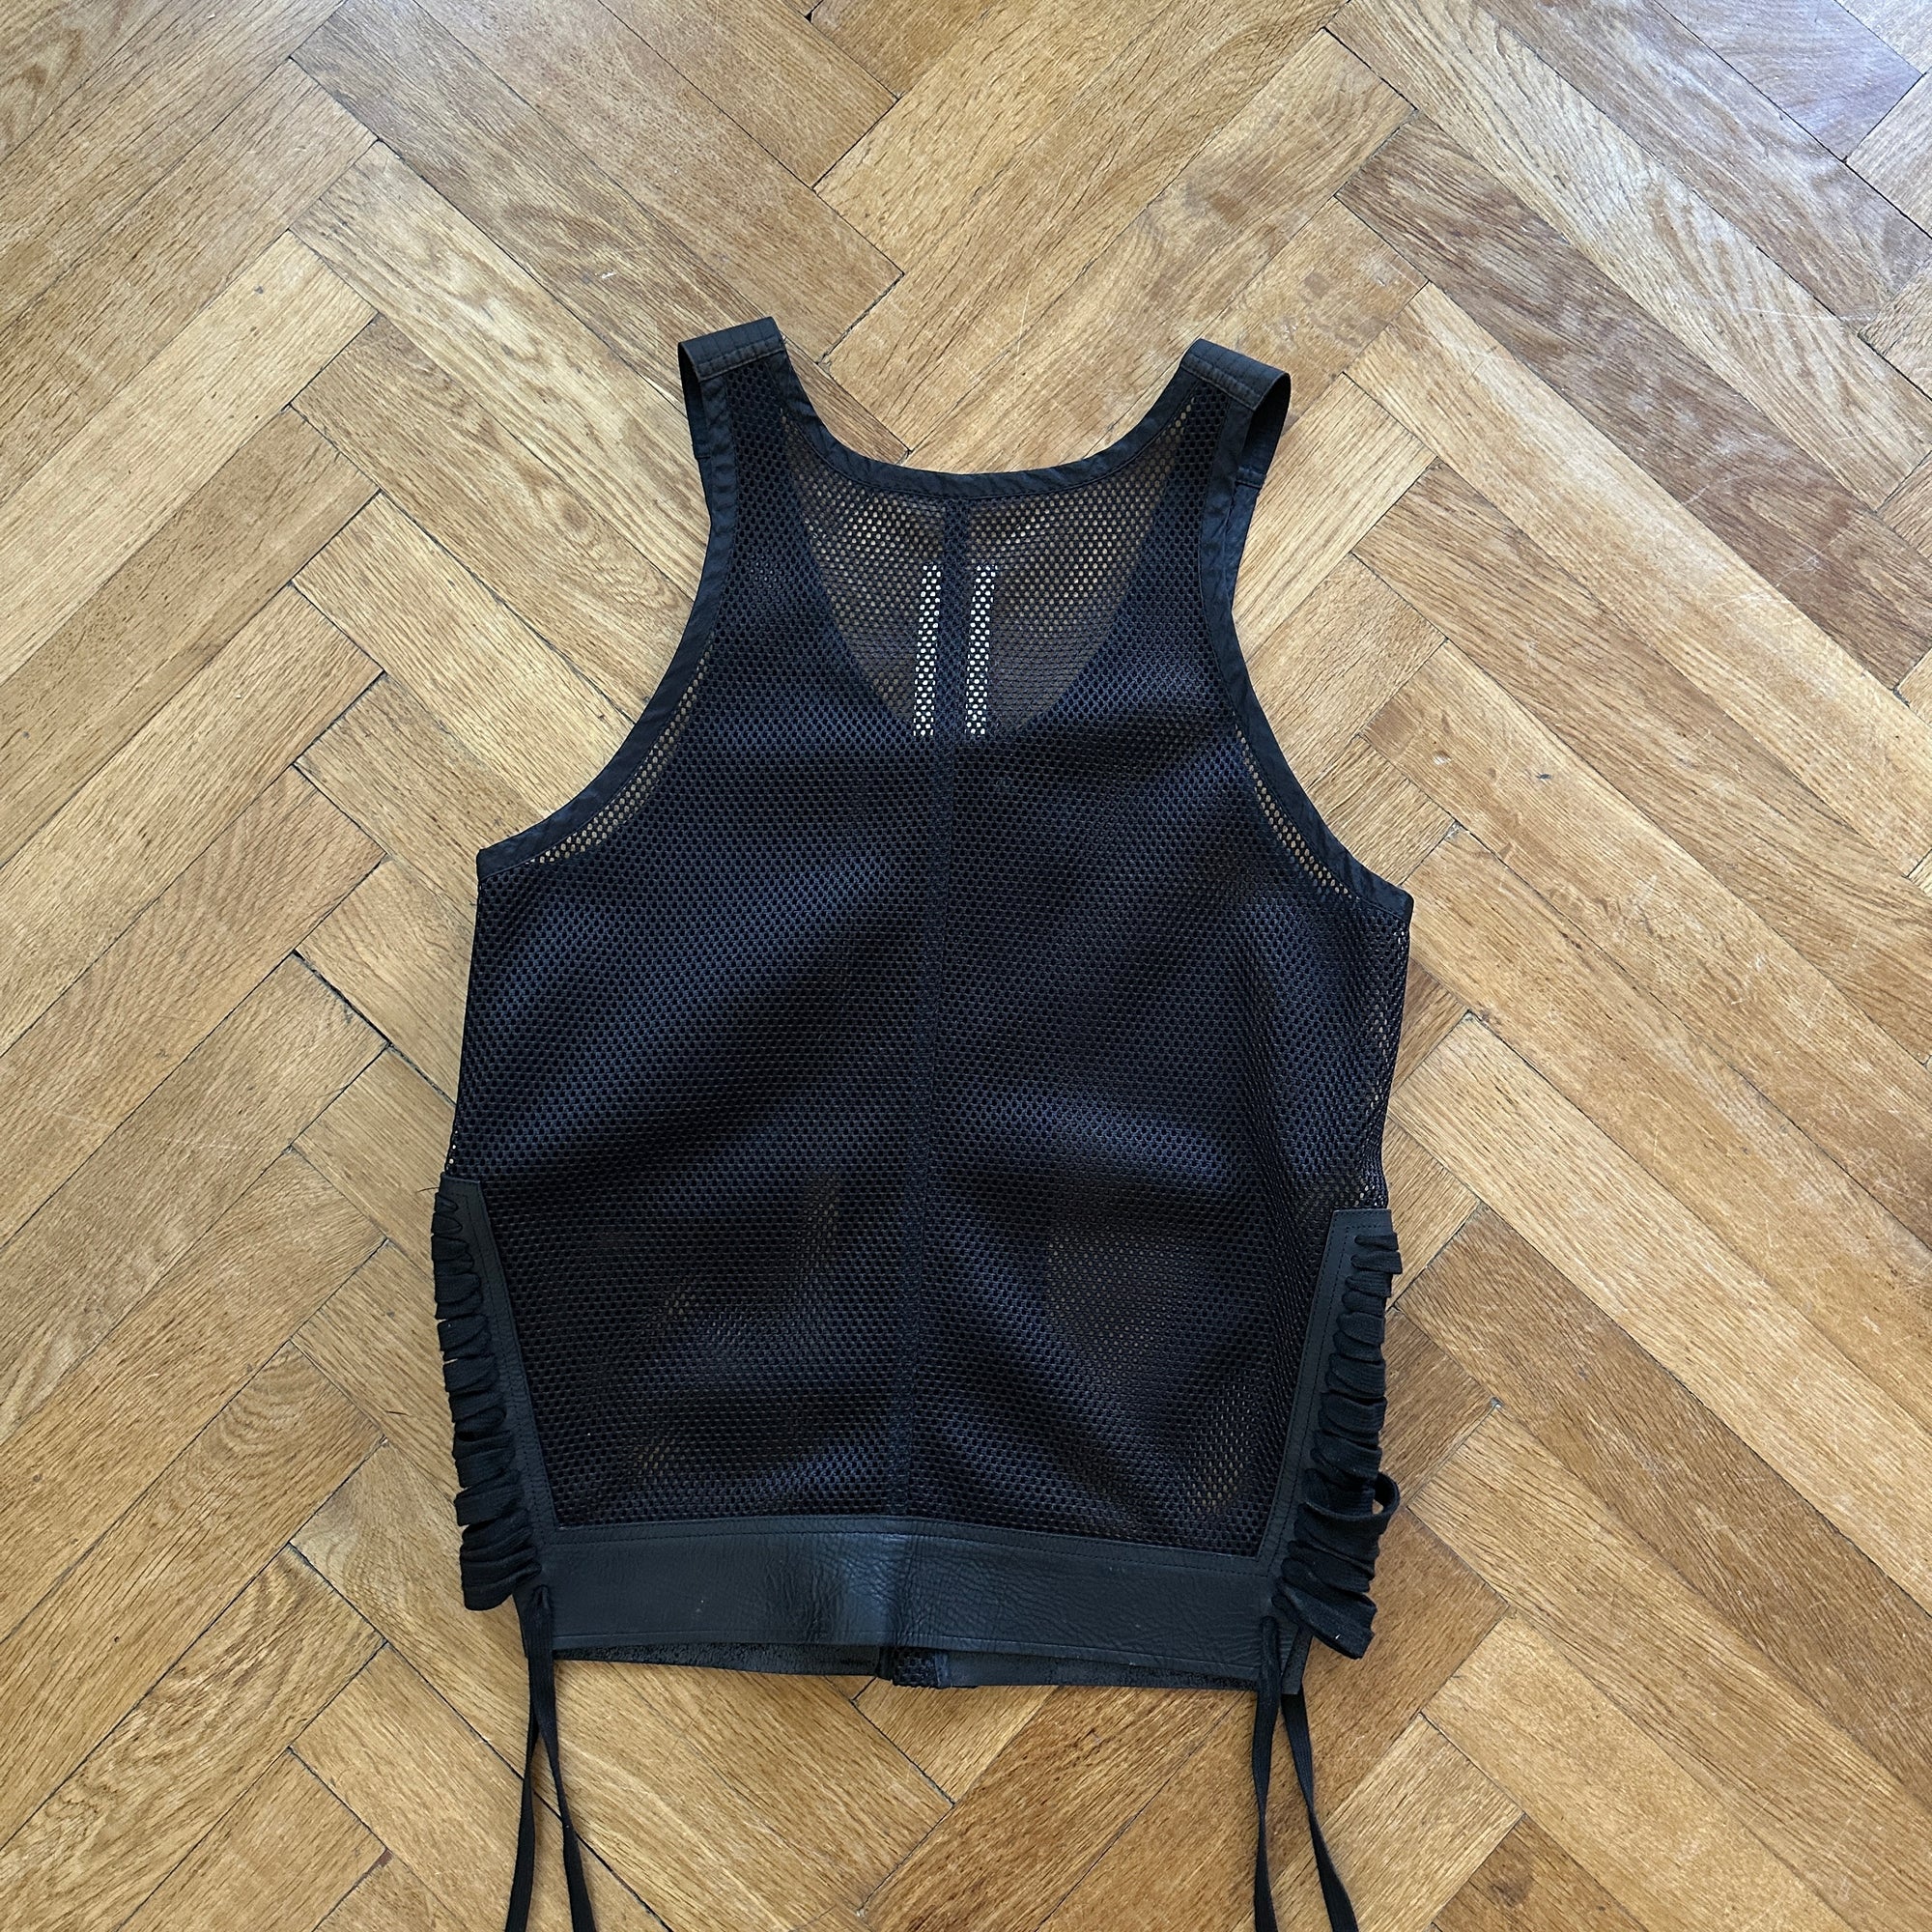 Rick Owens SS14 Vicious Tactial Utility Leather Mesh Laced Vest